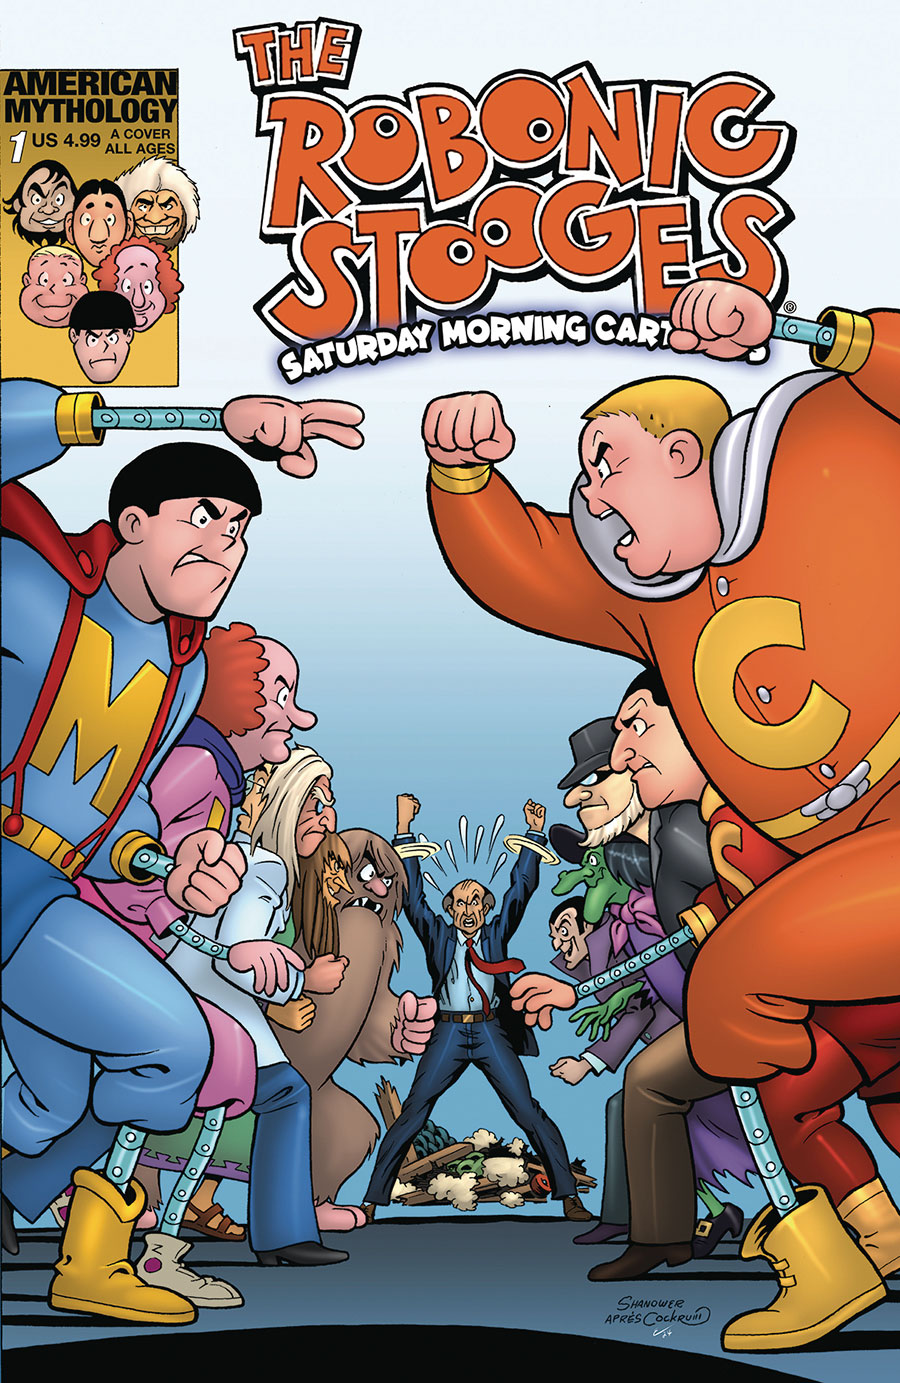 Robonic Stooges Saturday Morning Cartoons #1 (One Shot) Cover A Regular Eric Shanower Cover